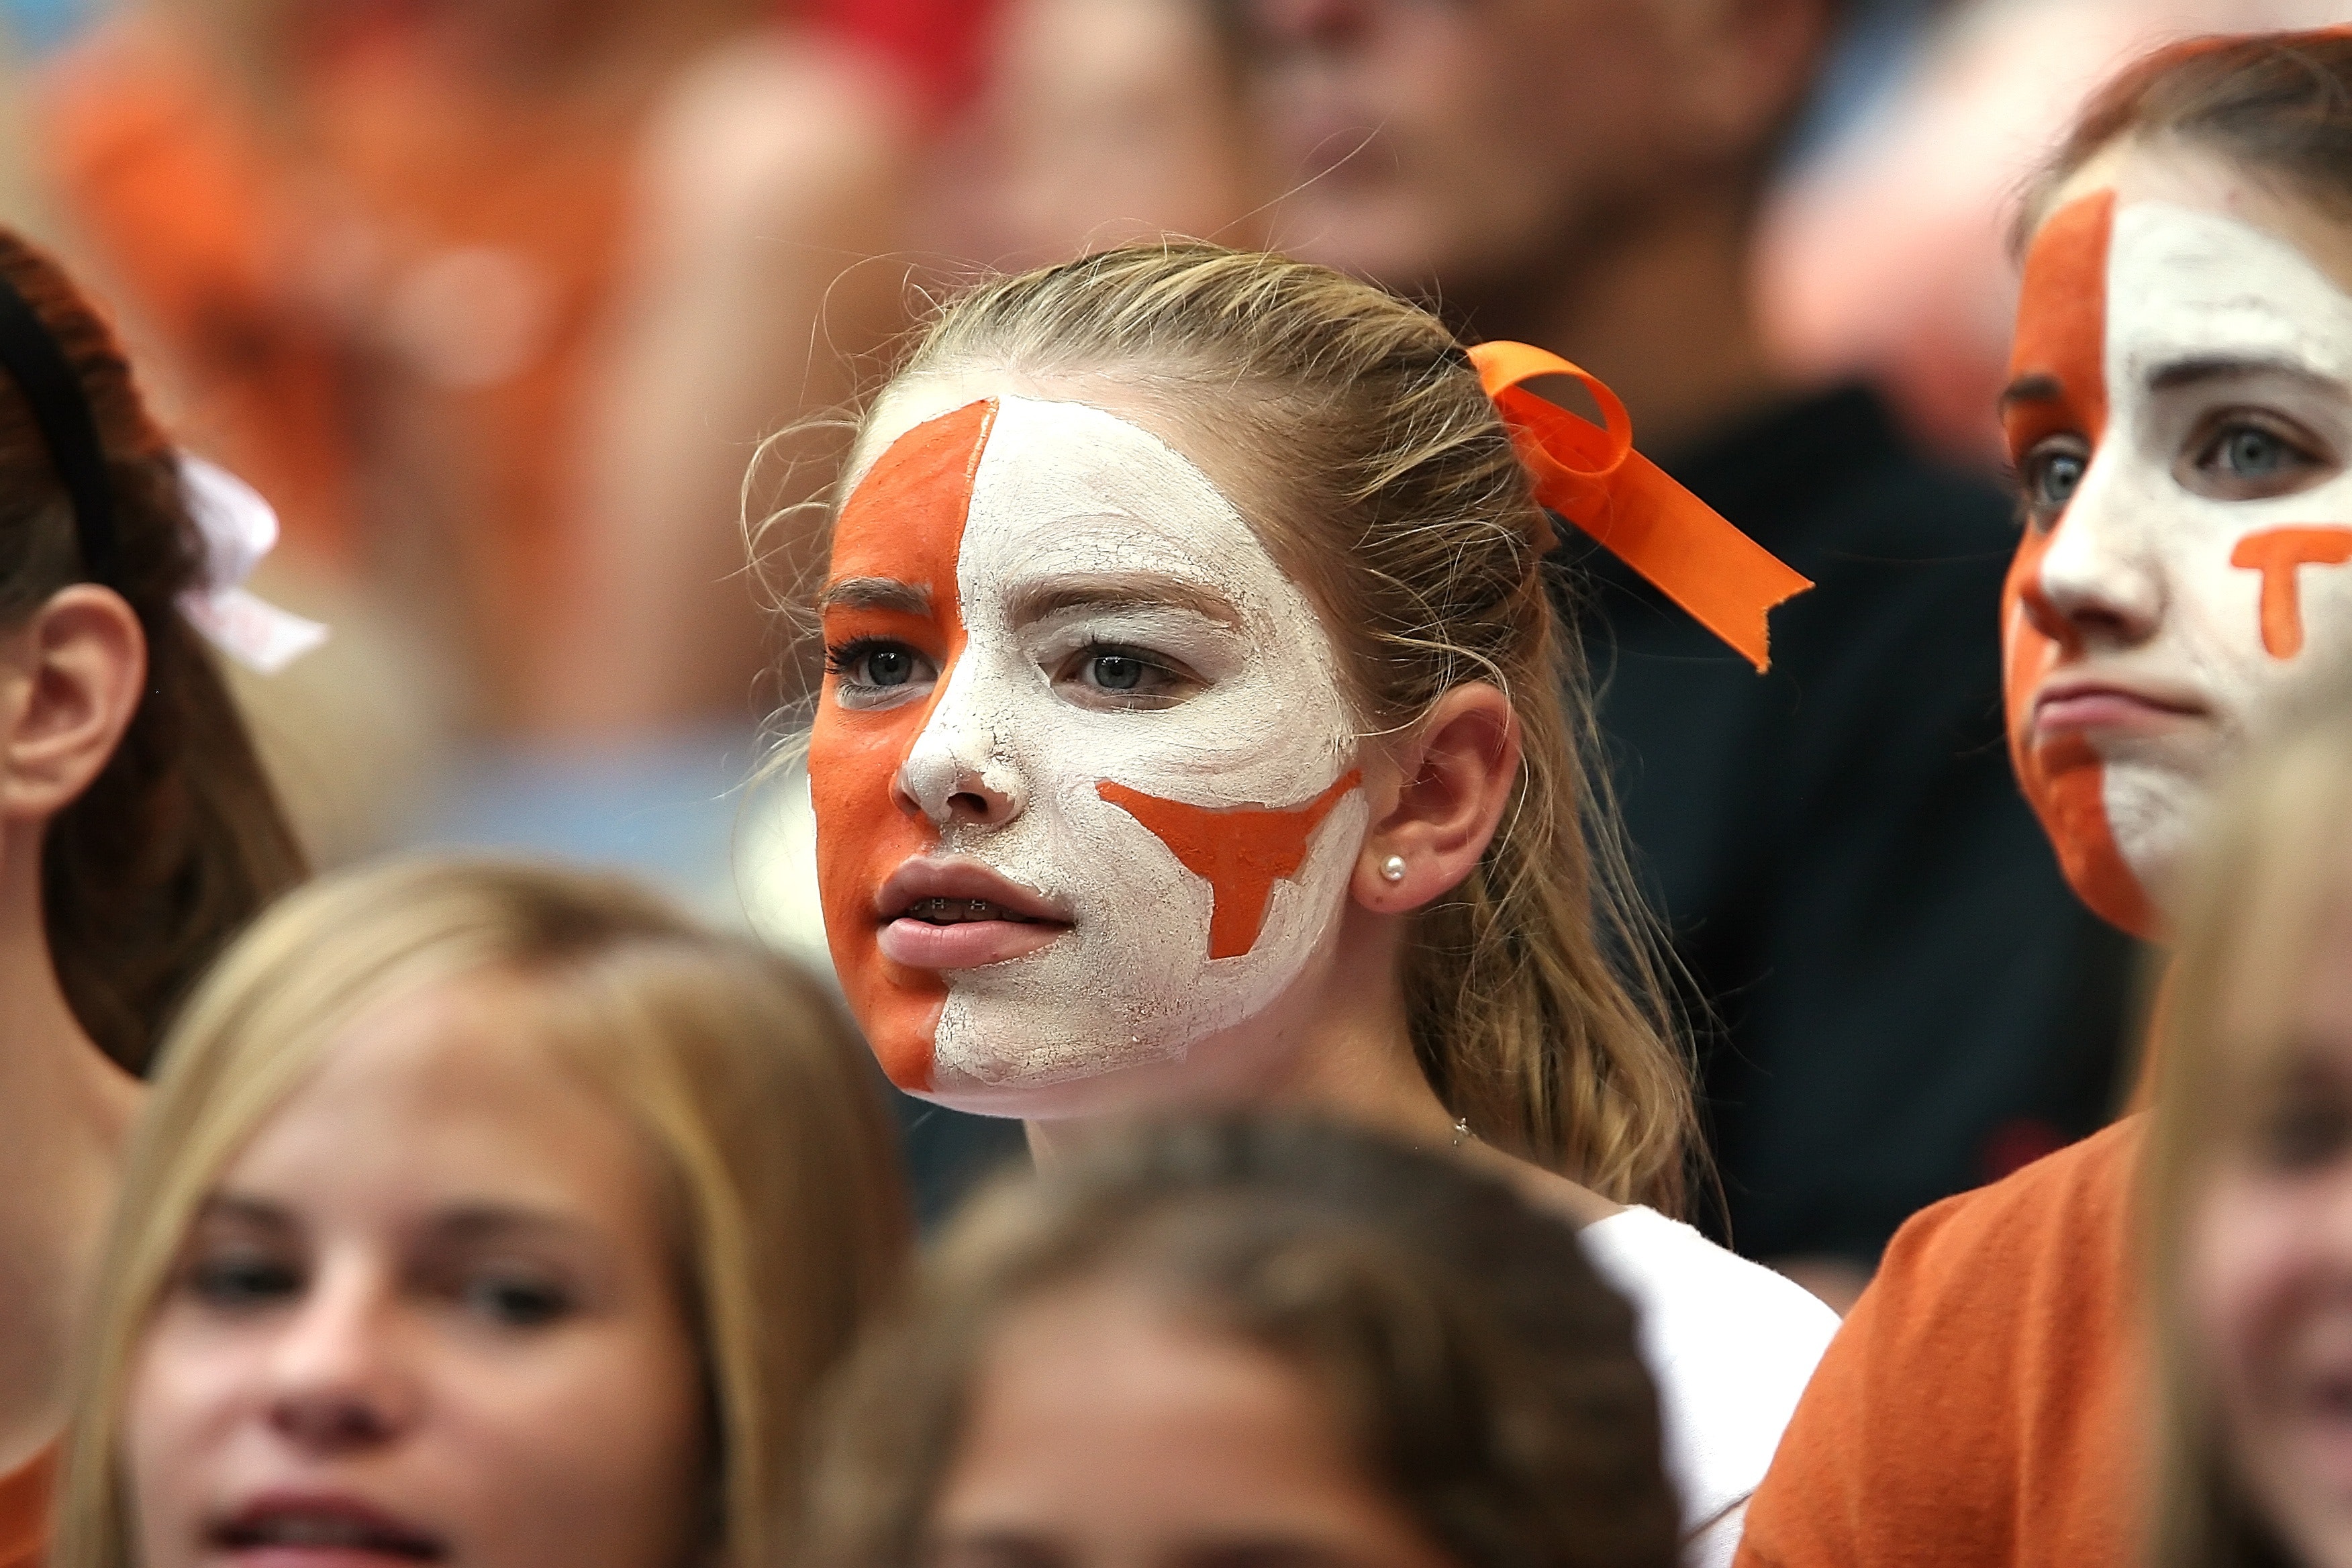 Blond hair woman with orange and white face paint photo